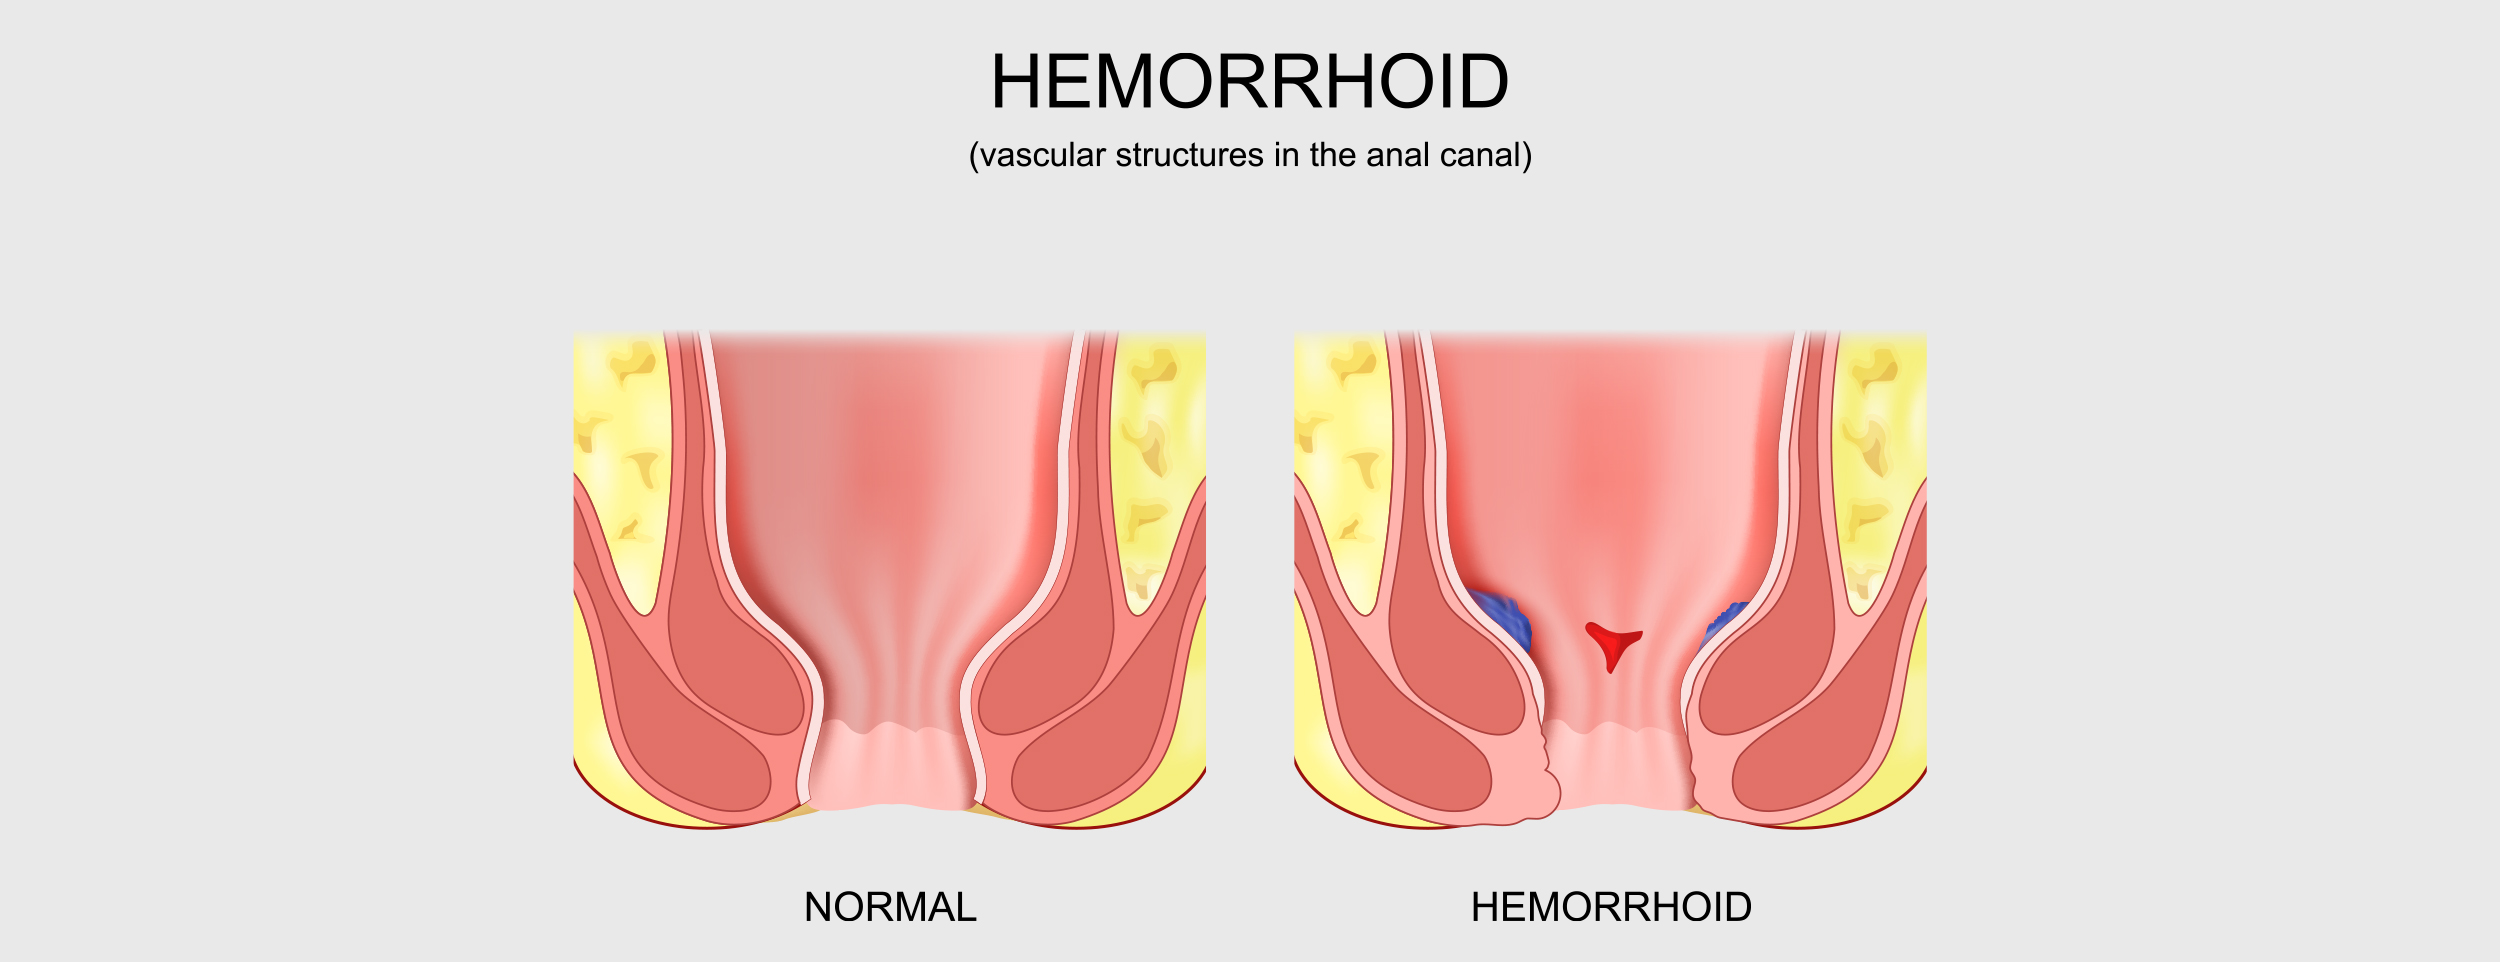 There are a number of symptoms associated with thrombosed hemorrhoids